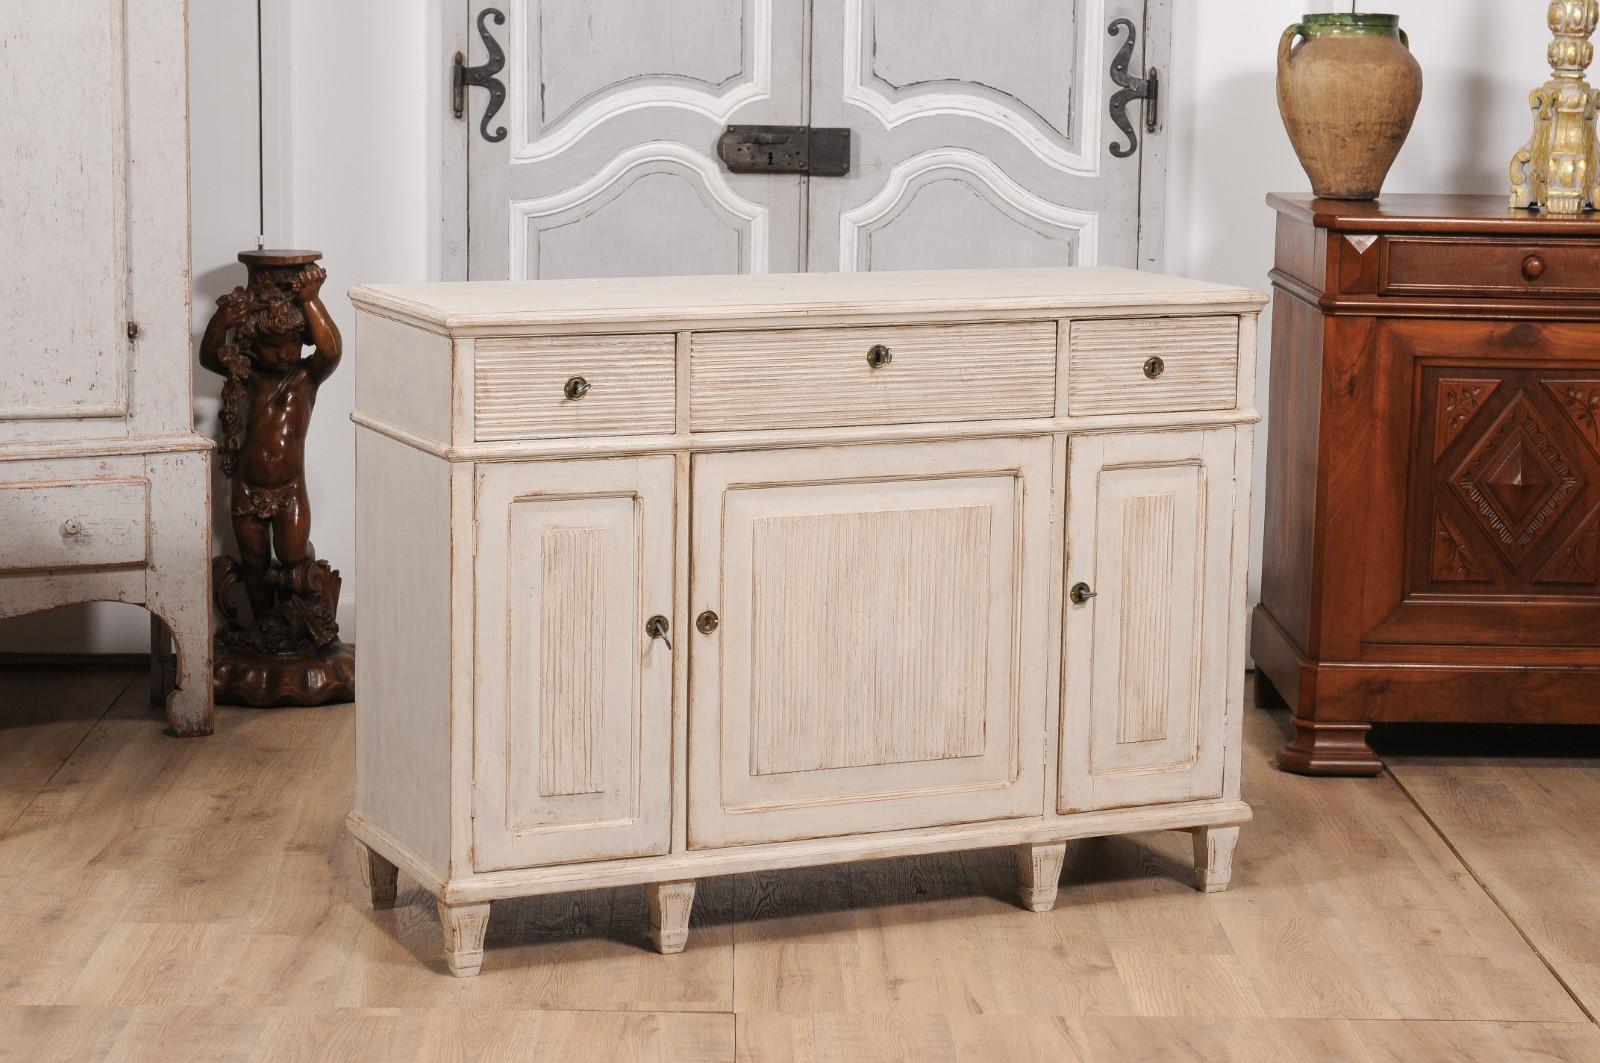 Gustavian Swedish 1860s Creamy Gray Painted Sideboard with Reeded Doors and Drawers For Sale